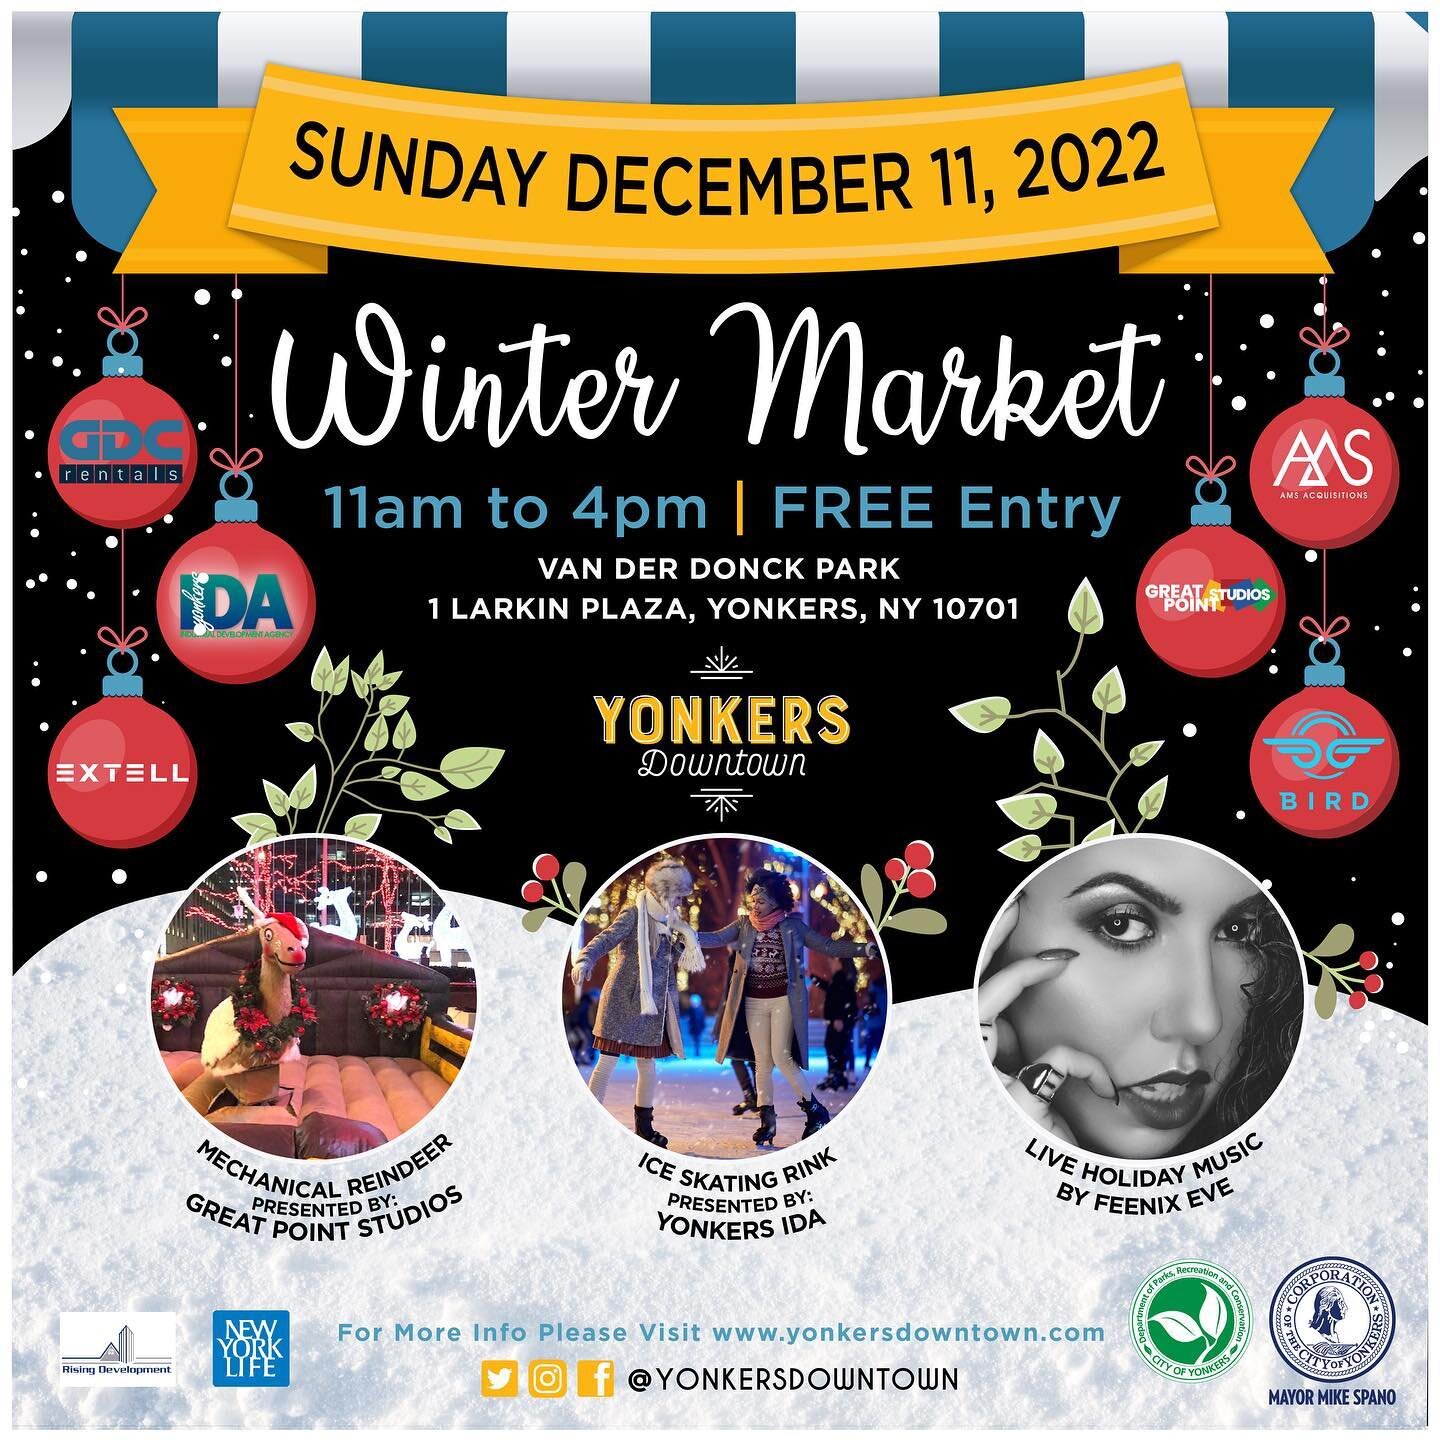 🚨Yonkers Downtown 
Announces Second Annual
Festive Winter Market on 
December 11th!🚨

🌲Featuring A FREE Ice-Skating Rink, Mechanical Reindeer🦌, Live Music,
and Local Artisan Vendors. 
 
Kick off the holiday season with Yonkers Downtown Waterfront